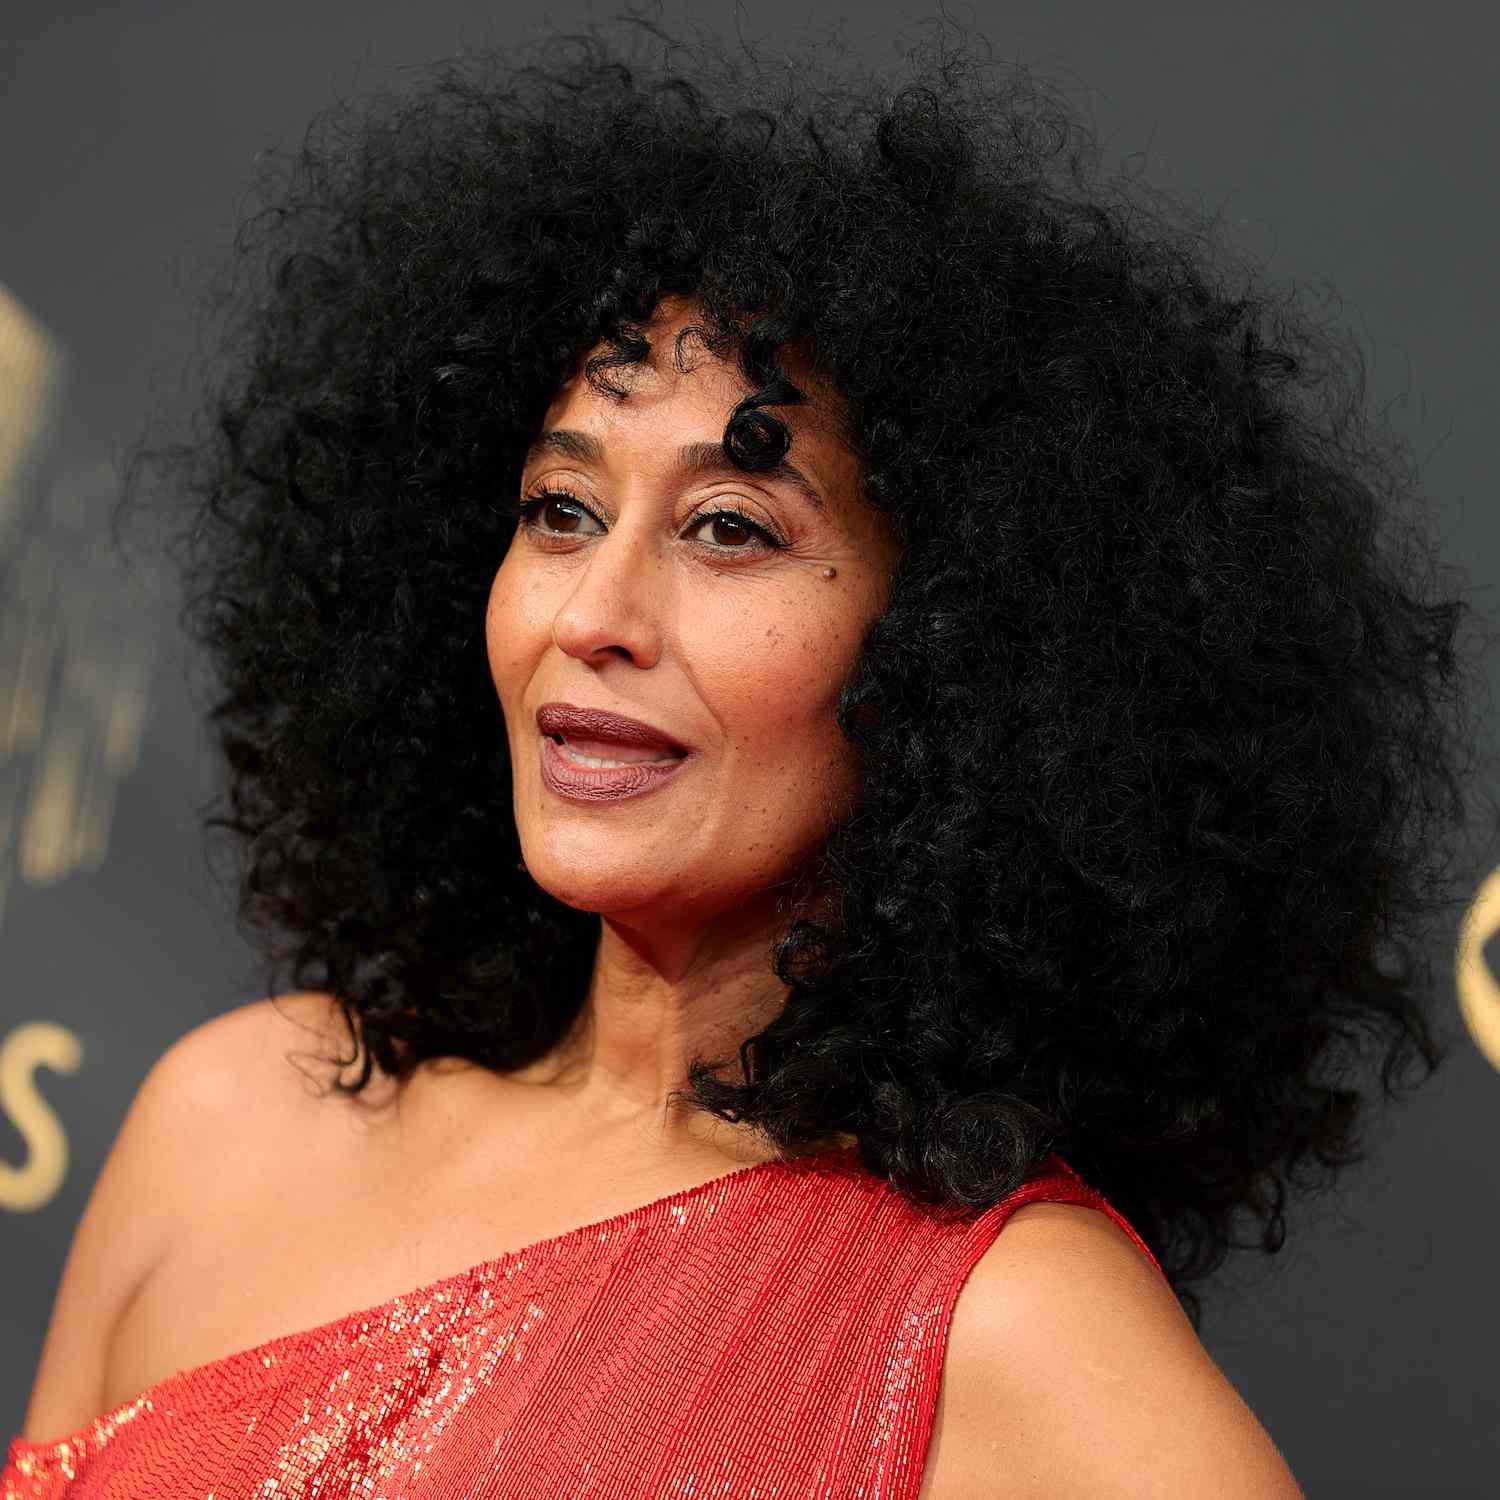 Tracee Ellis Ross wears a voluminous, curly shoulder-length hairstyle with face-framing layers